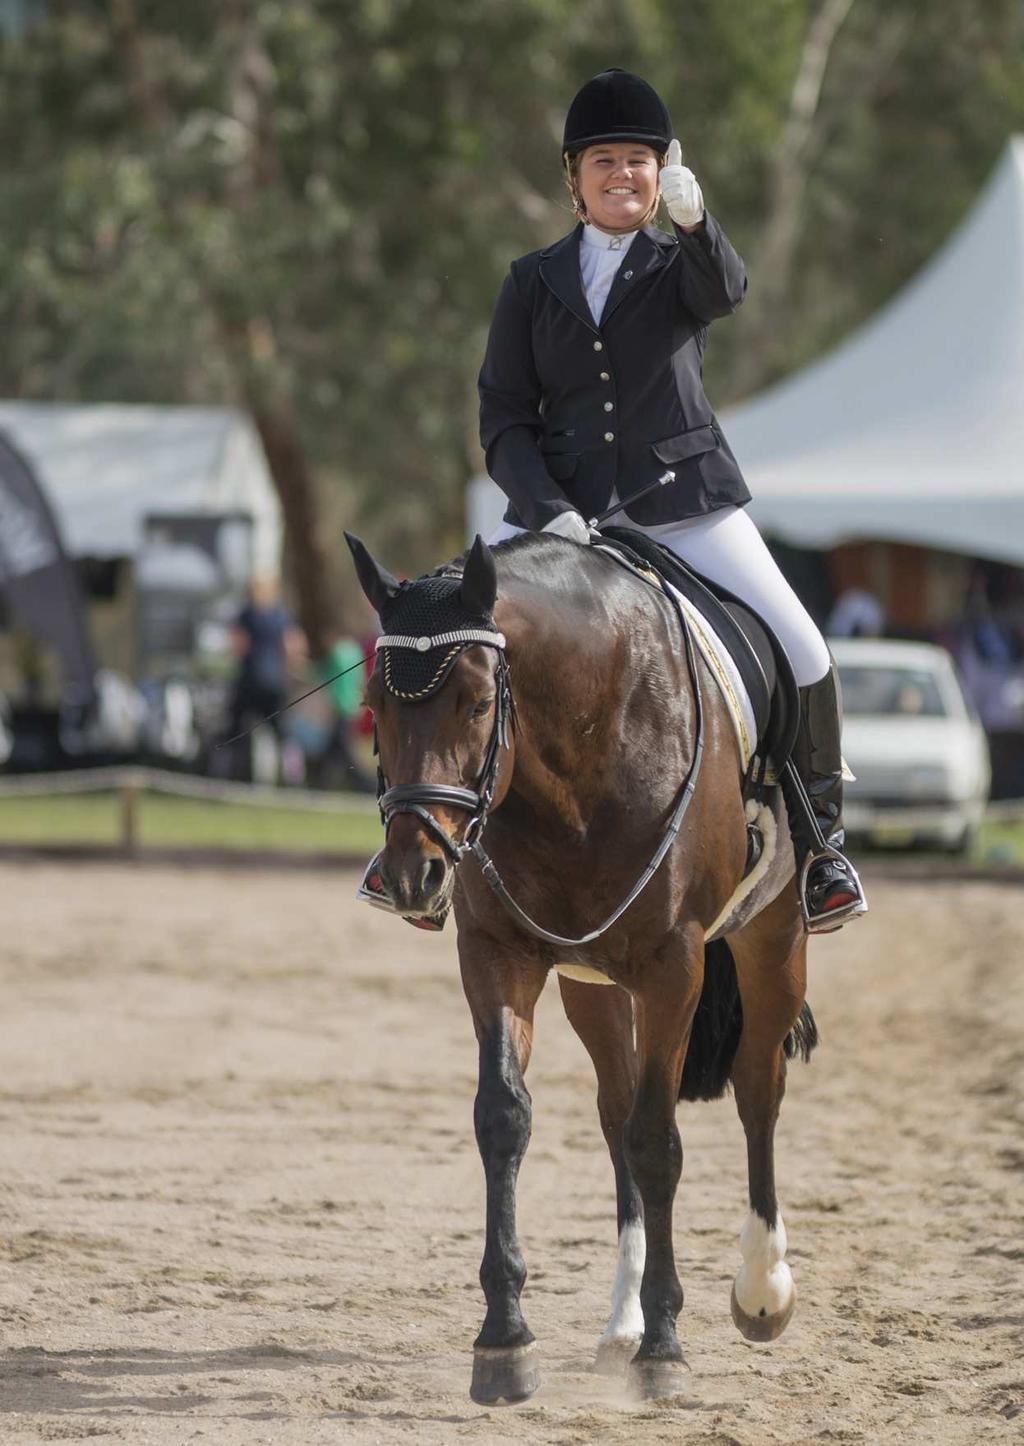 In this series: Part 1 (March issue): A proposal to reform dressage judging. Part 2 (April issue): How judging relates to horse training. Part 3 (May issue): Incorrect responses - Marks: 0 to 3.